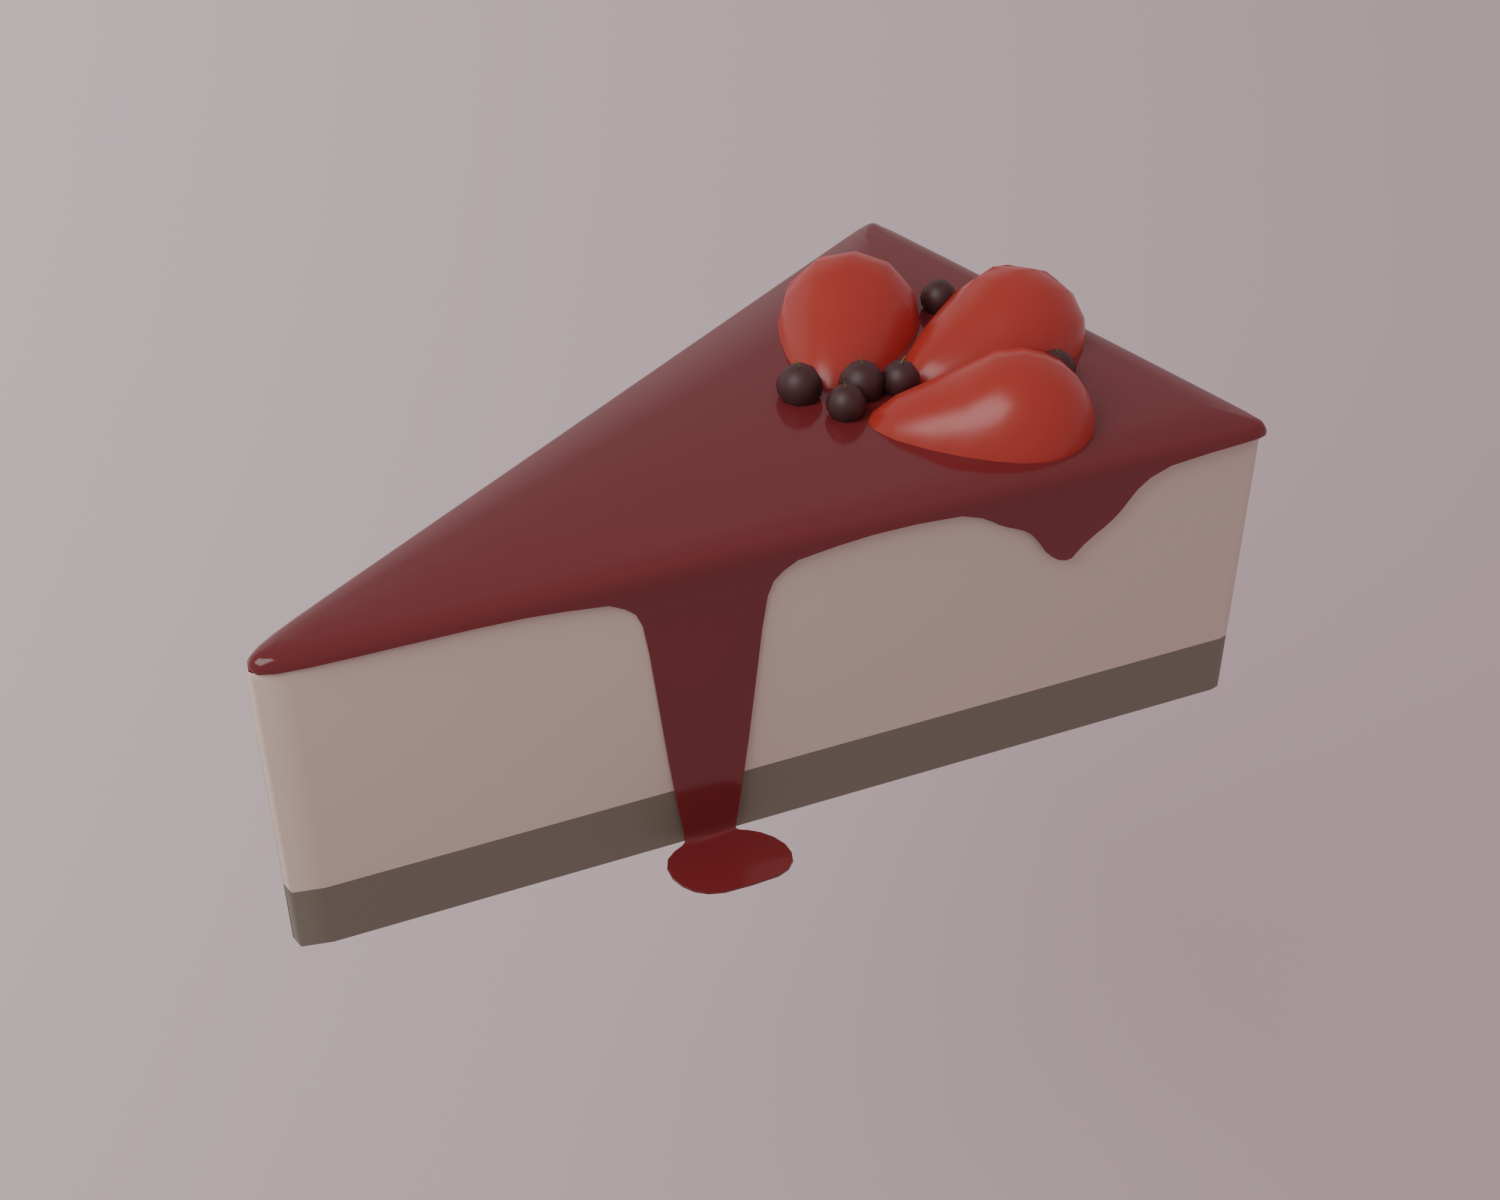 Cake 3D Models for Free - Download Free 3D · Clara.io